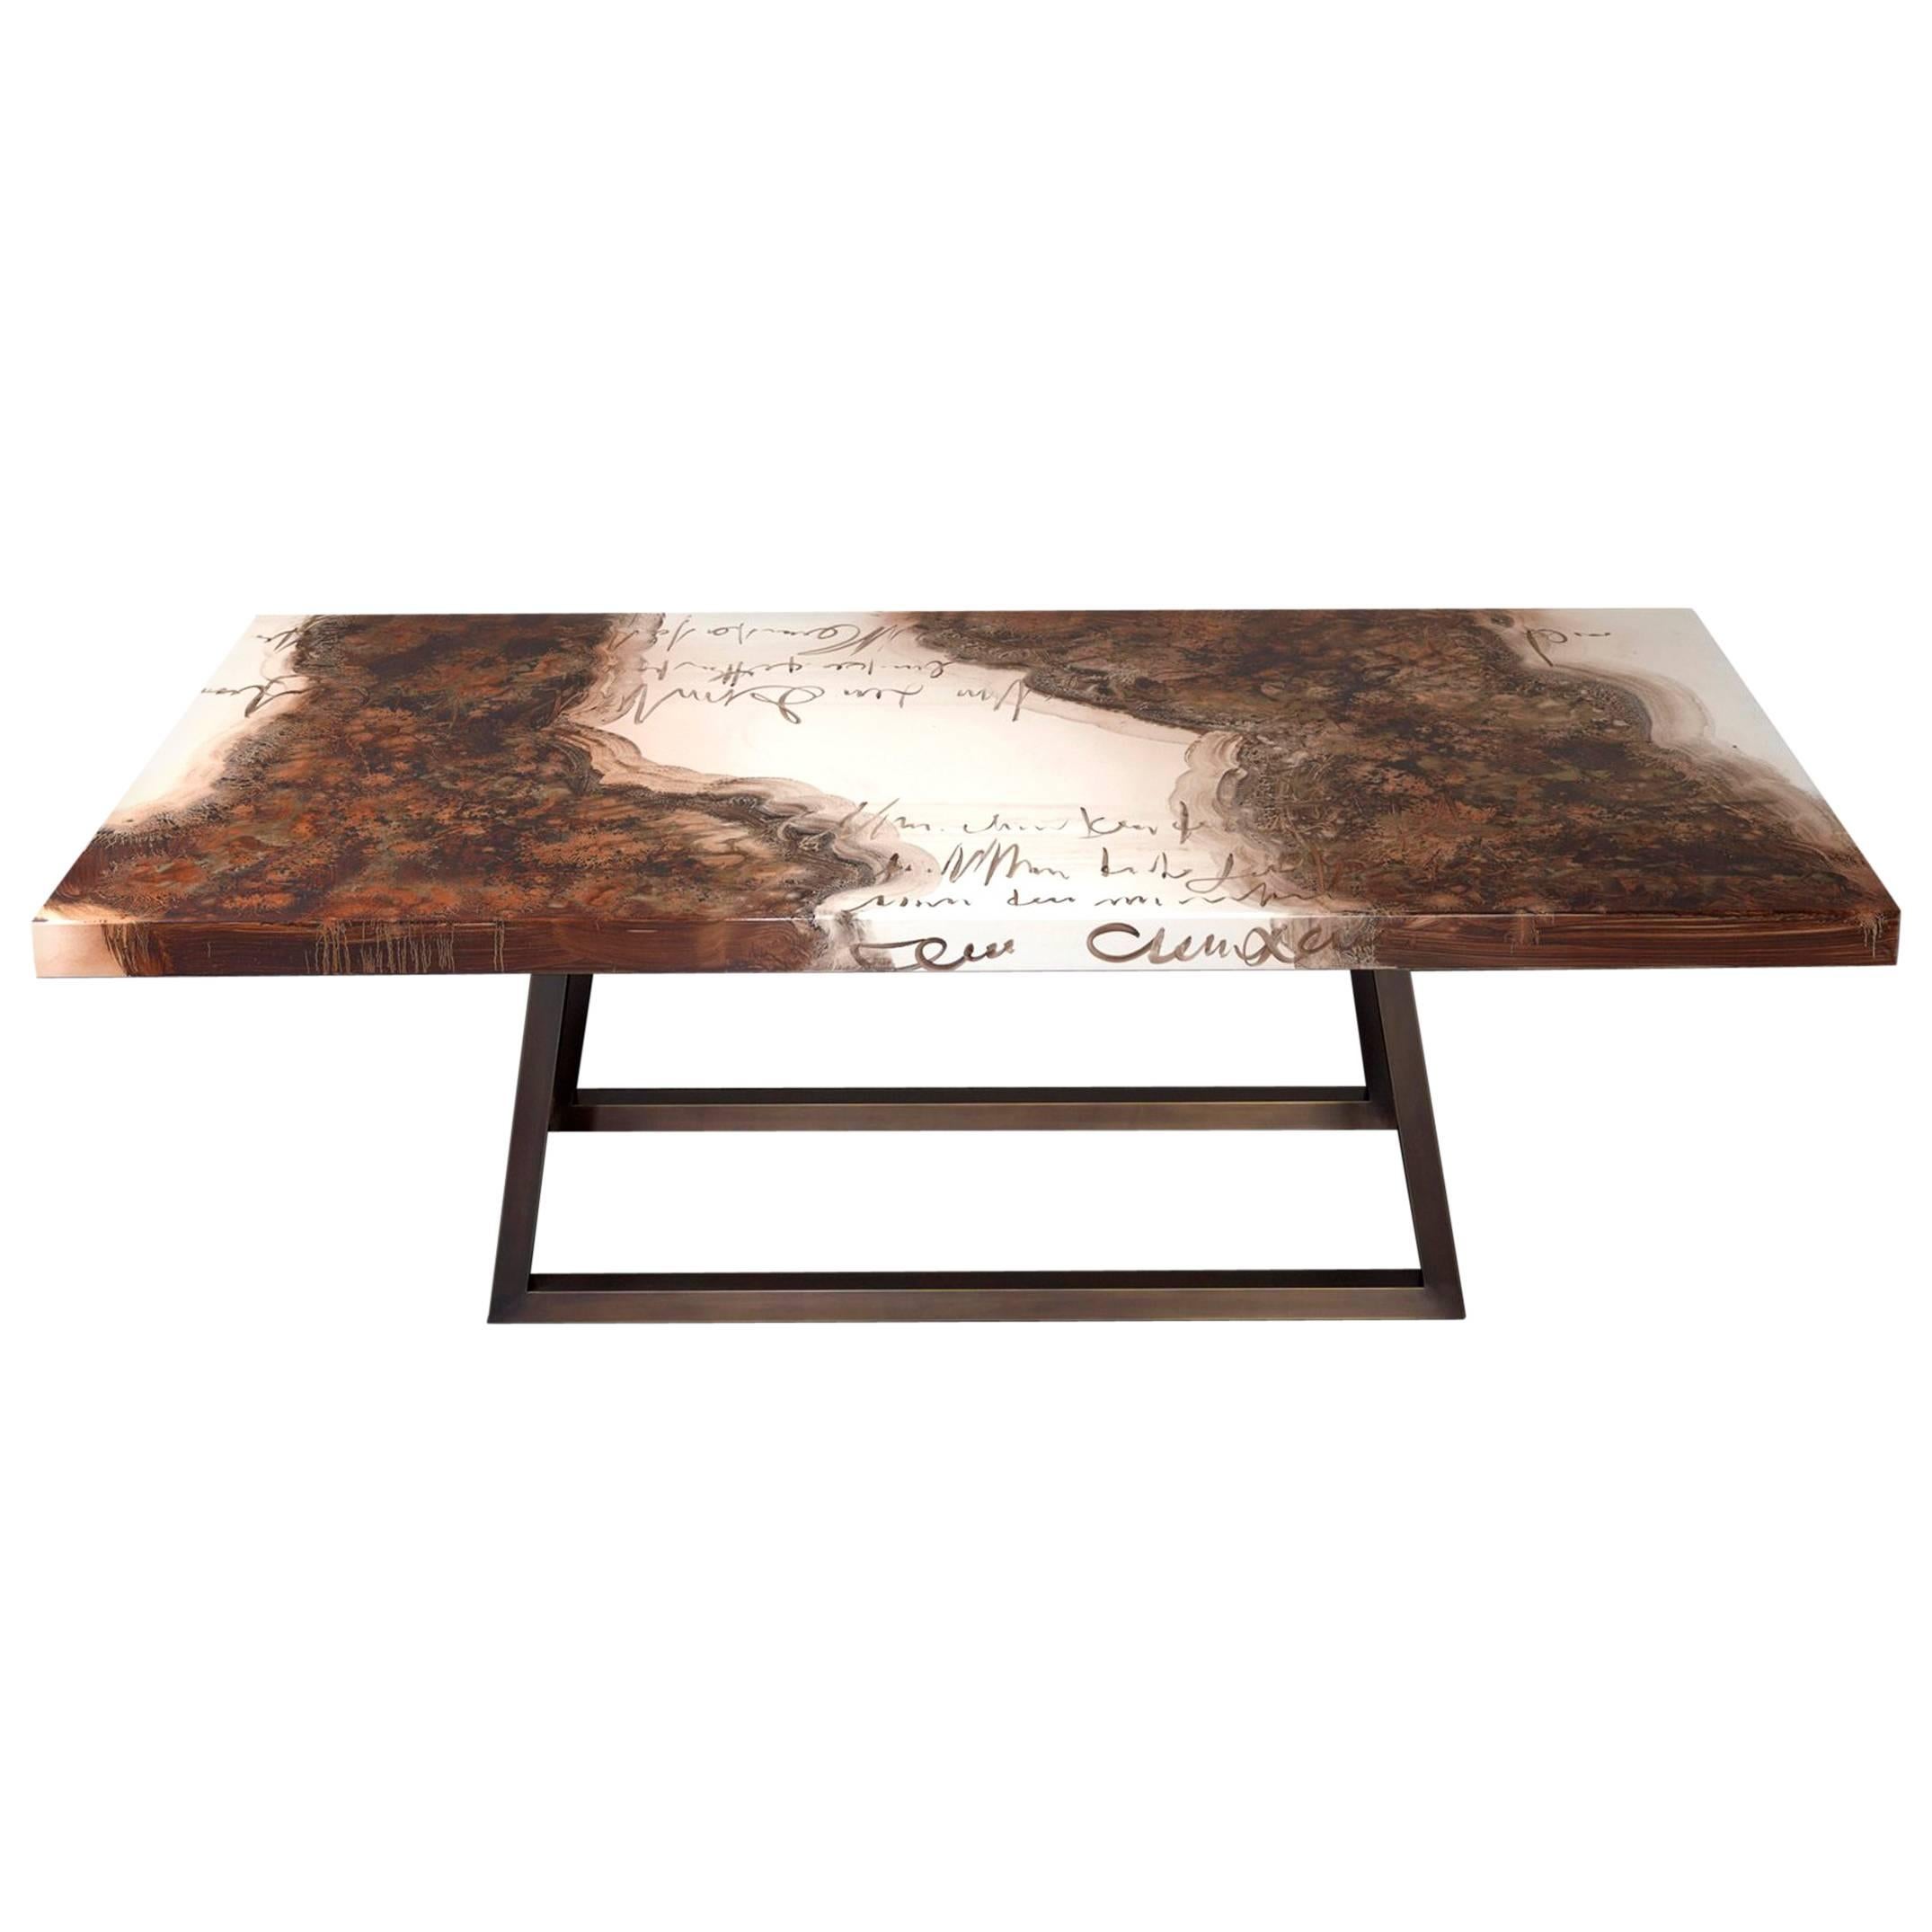 Creatis Table Hand-Painted Lacquered Solid Wood For Sale at 1stDibs